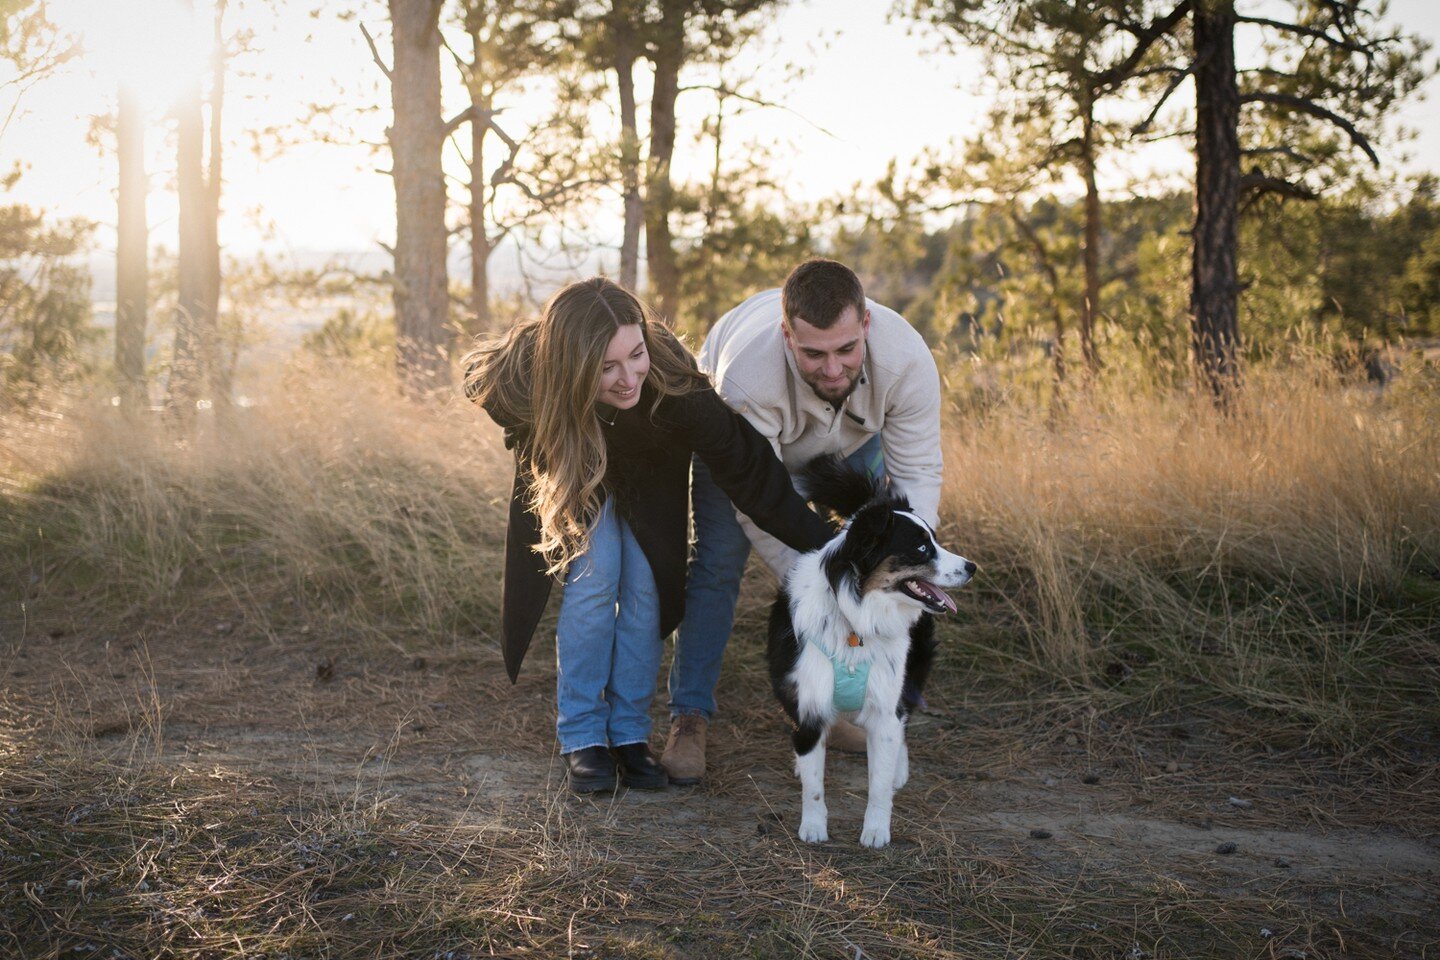 Engagement sessions are a playground for creativity! 

We kicked this one off in the studio, honing some posing techniques. Then headed downtown to play in interesting light before venturing to Zimmerman Park to connect with their dog, Remi. We got s